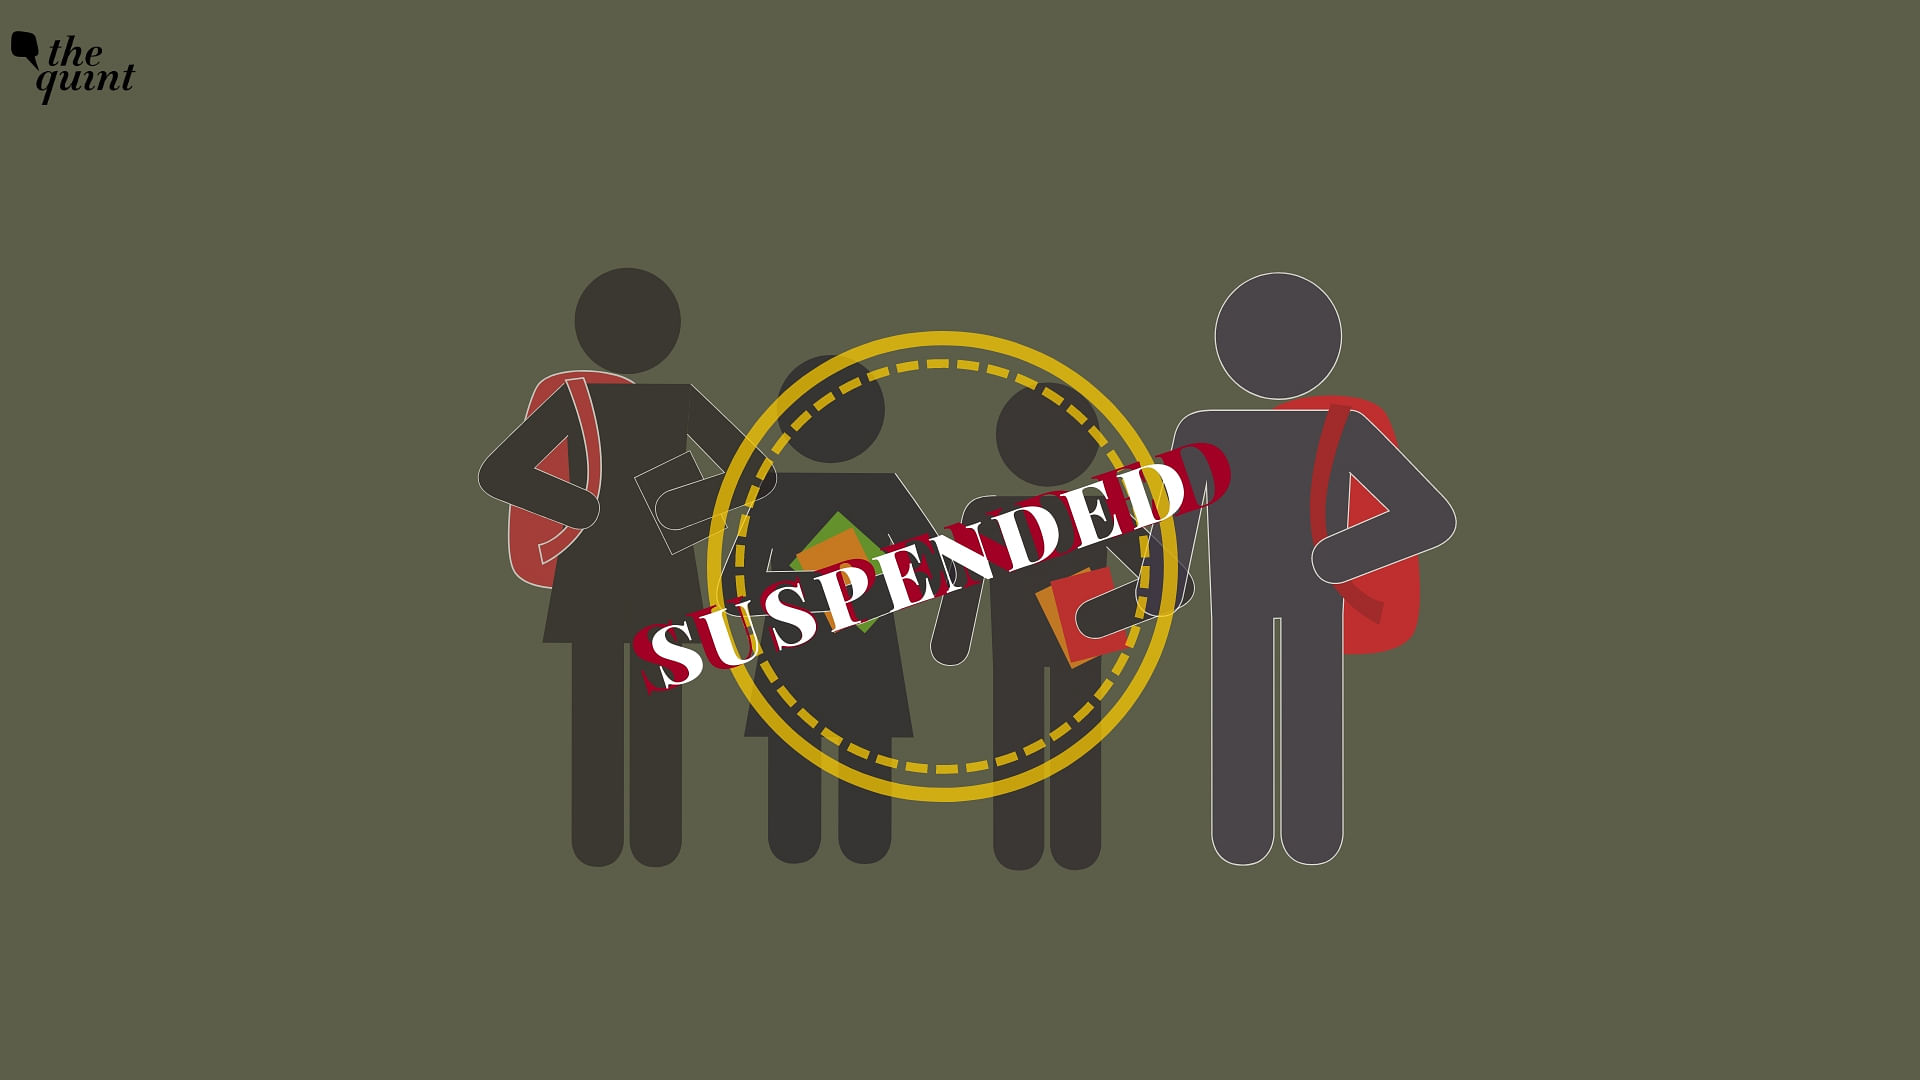 263 students of School of Journalism and Mass Communication (SJMC) of Devi Ahilya University – Indore have been suspended by the administration for a week on Saturday, 12 January, for a week for skipping a Surya Namaskar event.